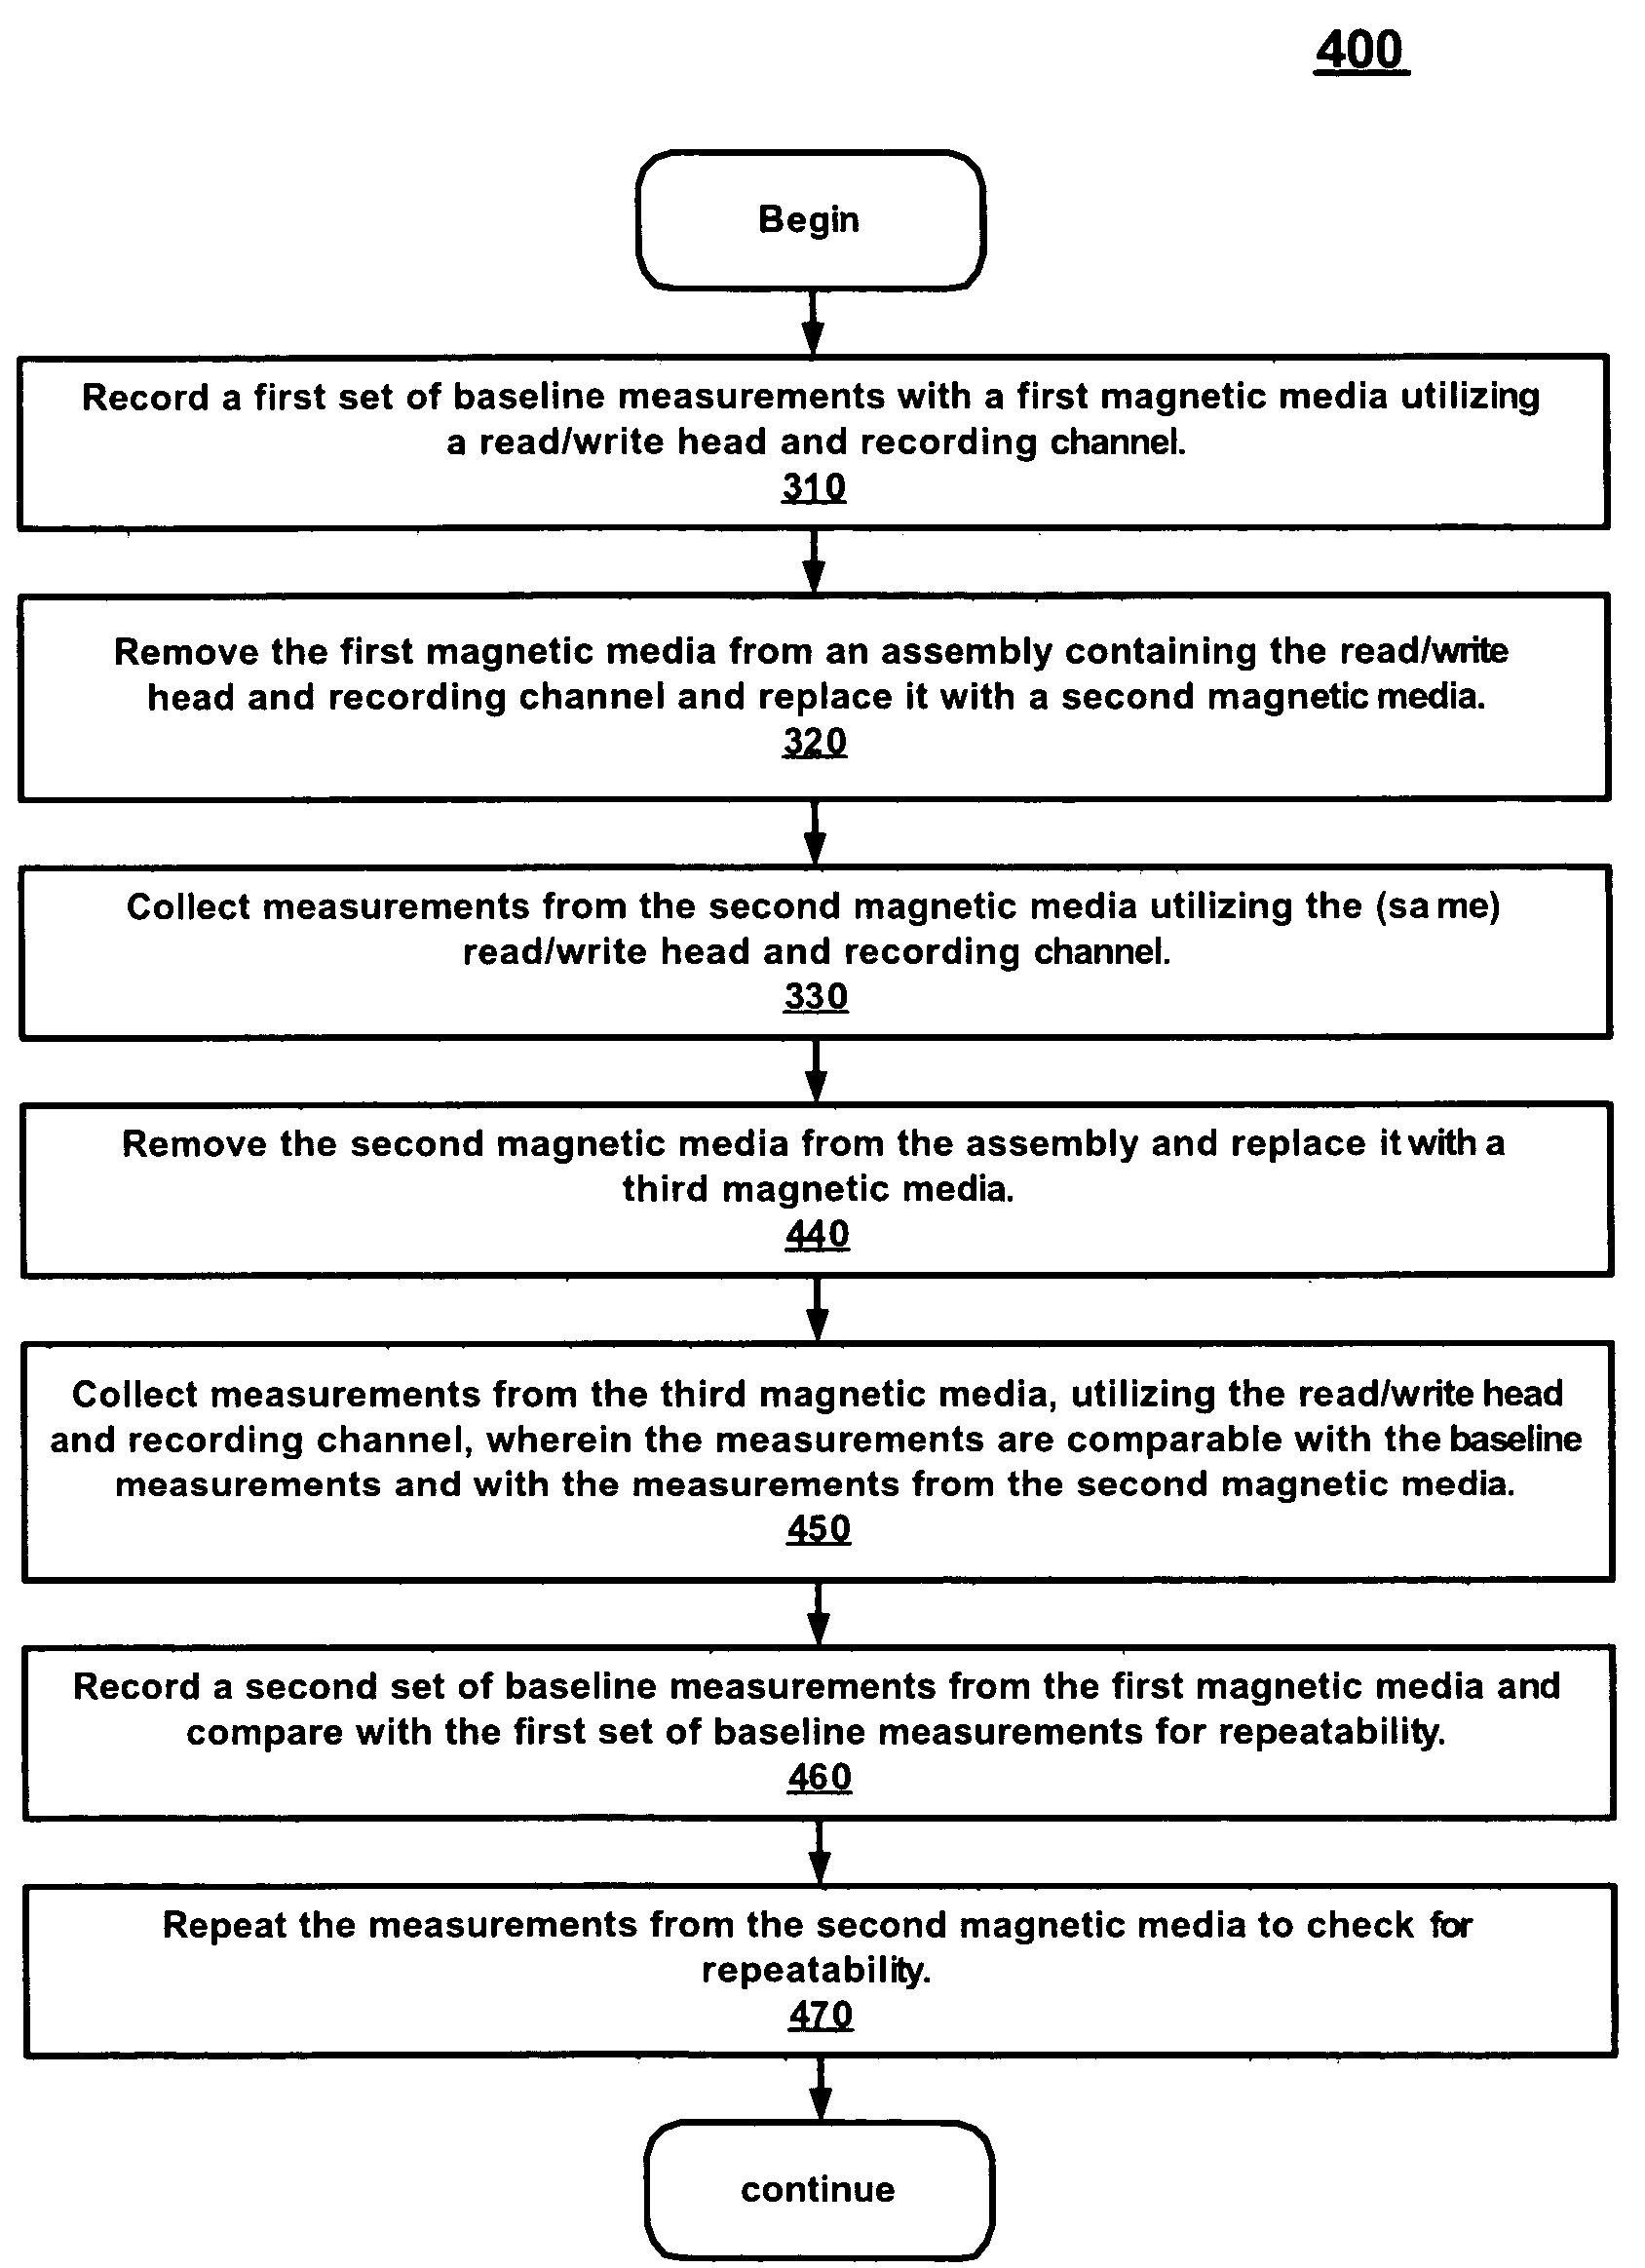 Disk pack swap process for evaluating magnetic recording performance